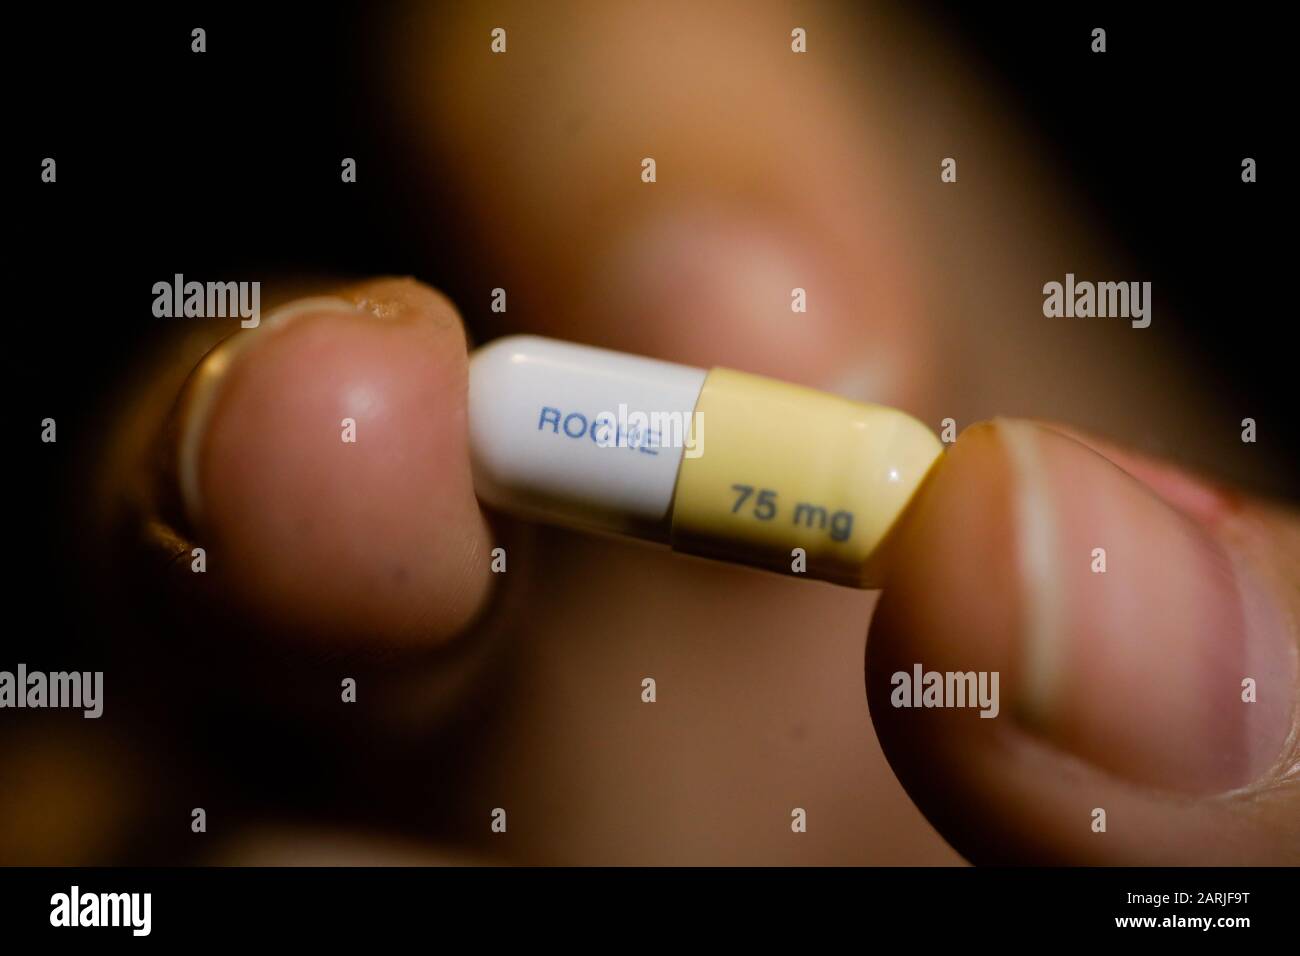 Bucharest, Romania - January 26, 2020: Close up image with the the fingers of a woman holding a Tamiflu capsule (oseltamivir), an antiviral medication Stock Photo